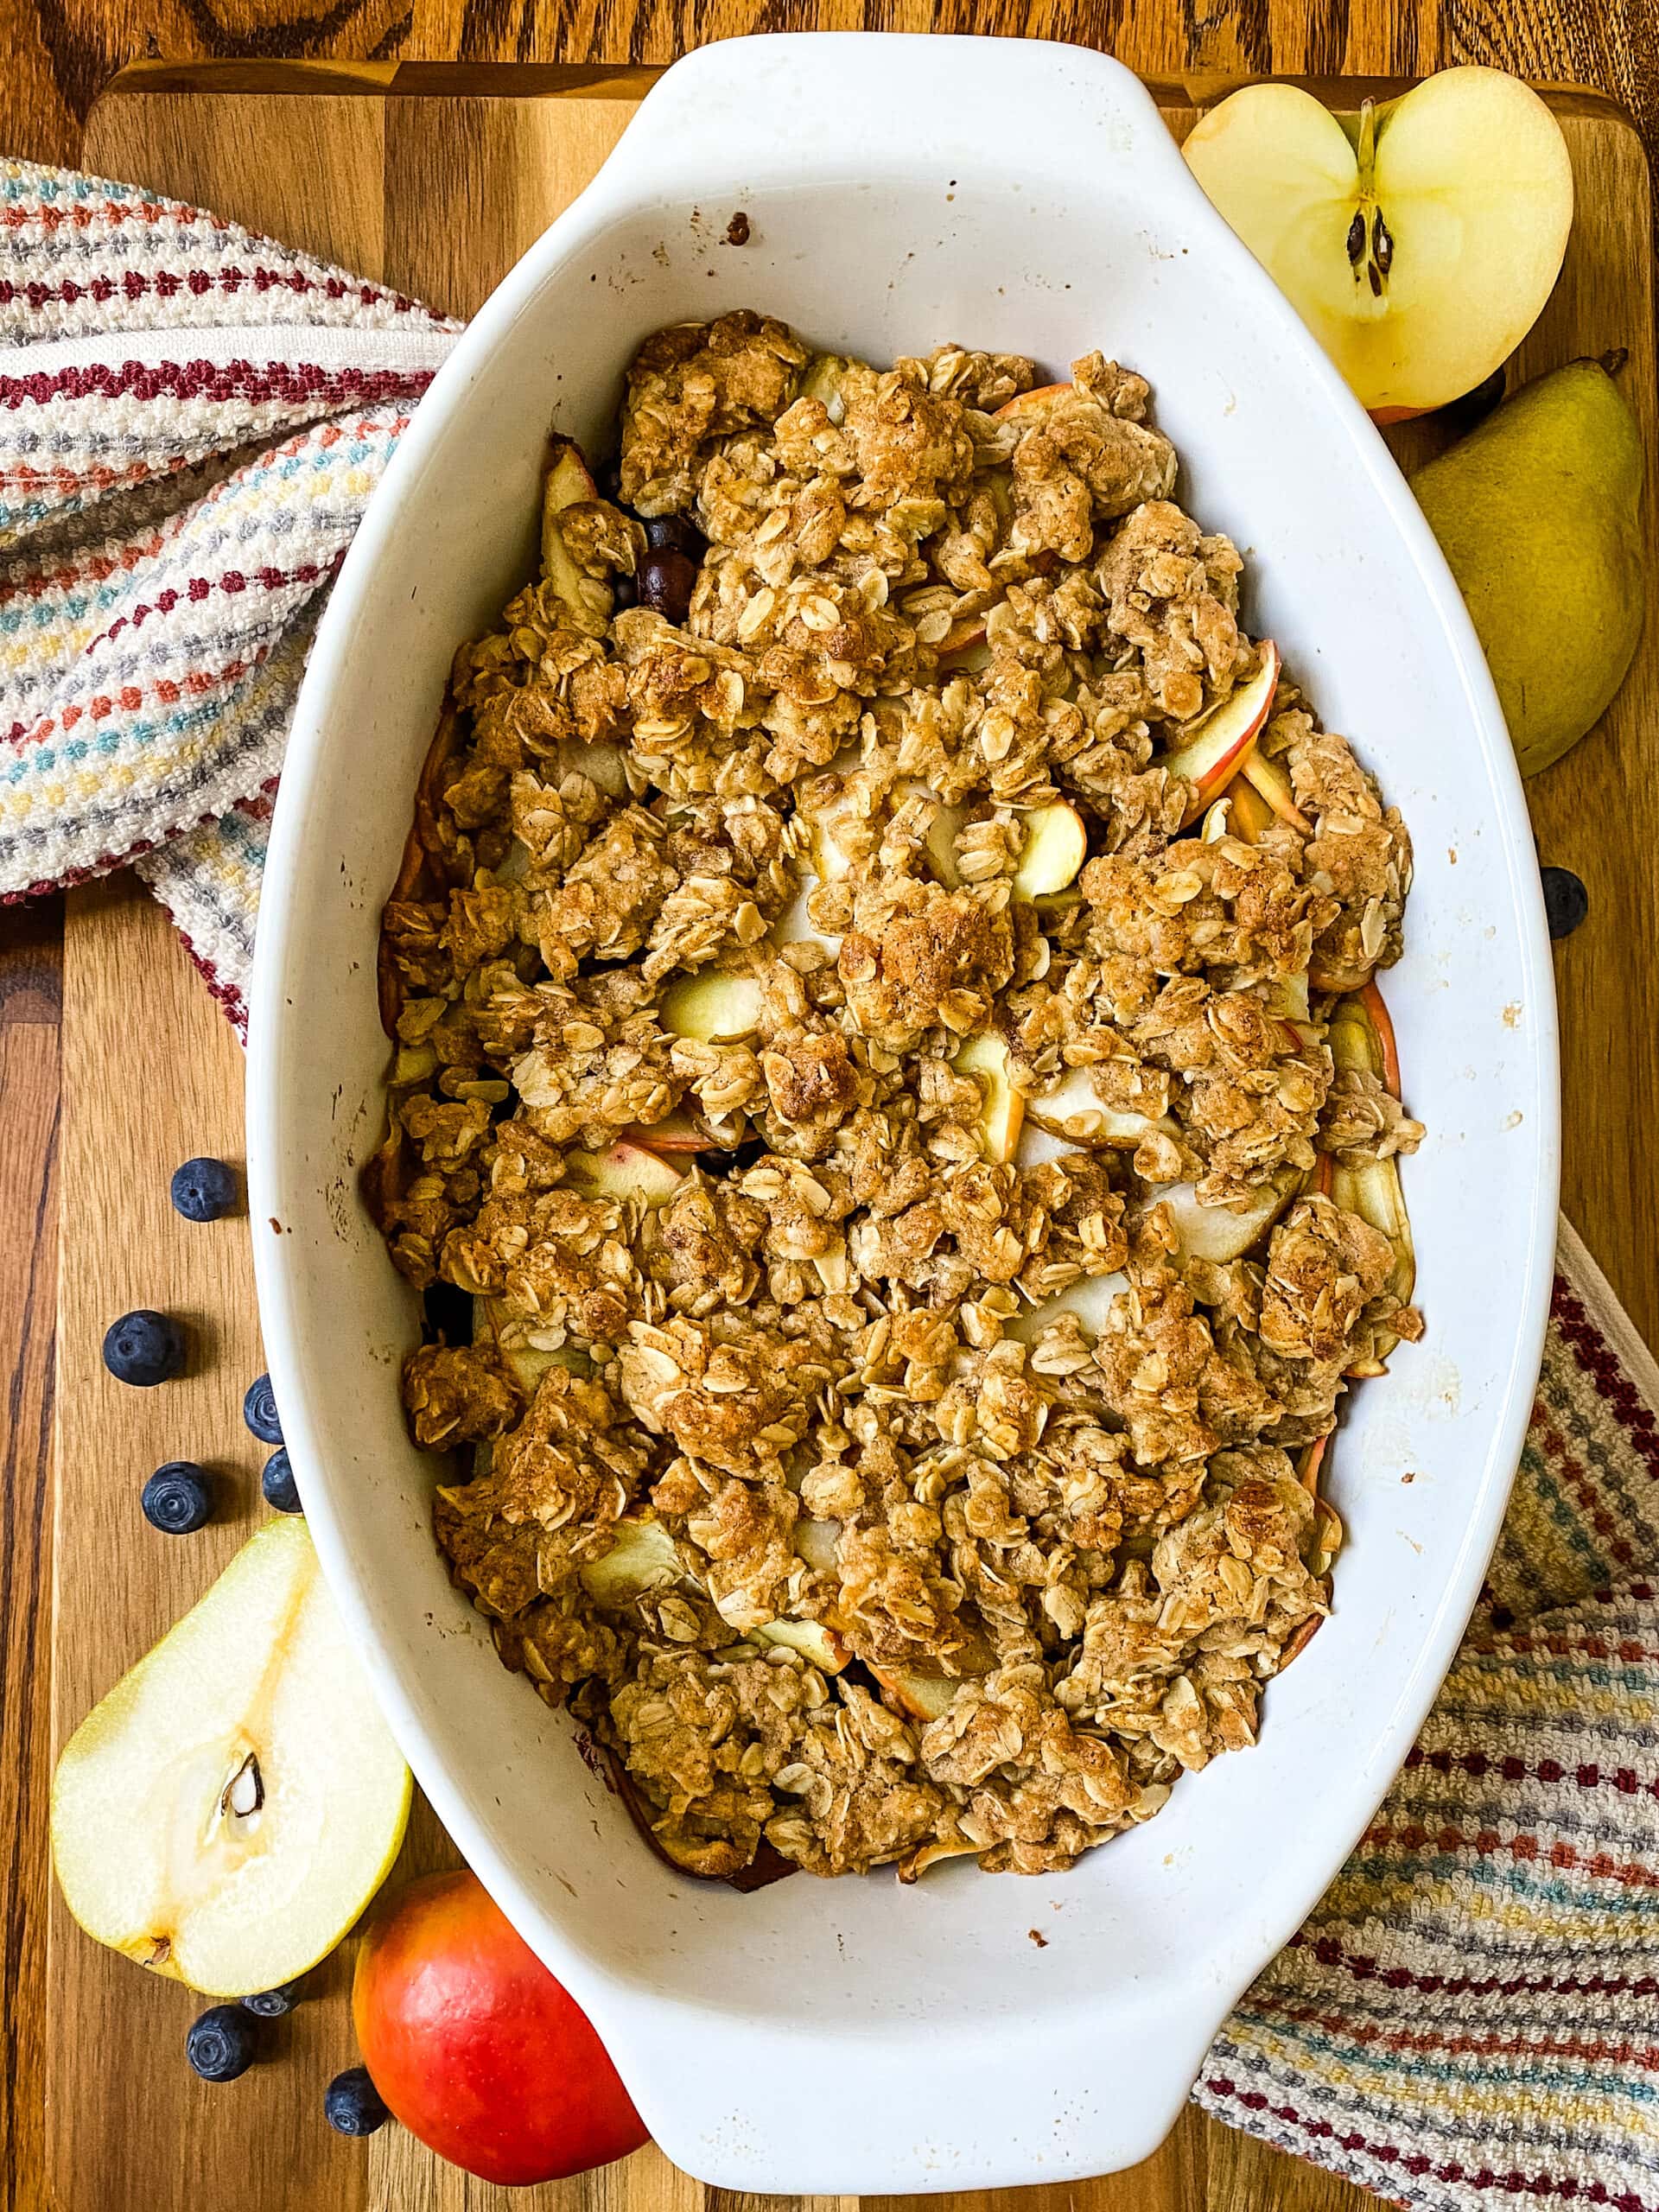 Apple, Pear, And Blueberry Crumble - Cooking With Fudge